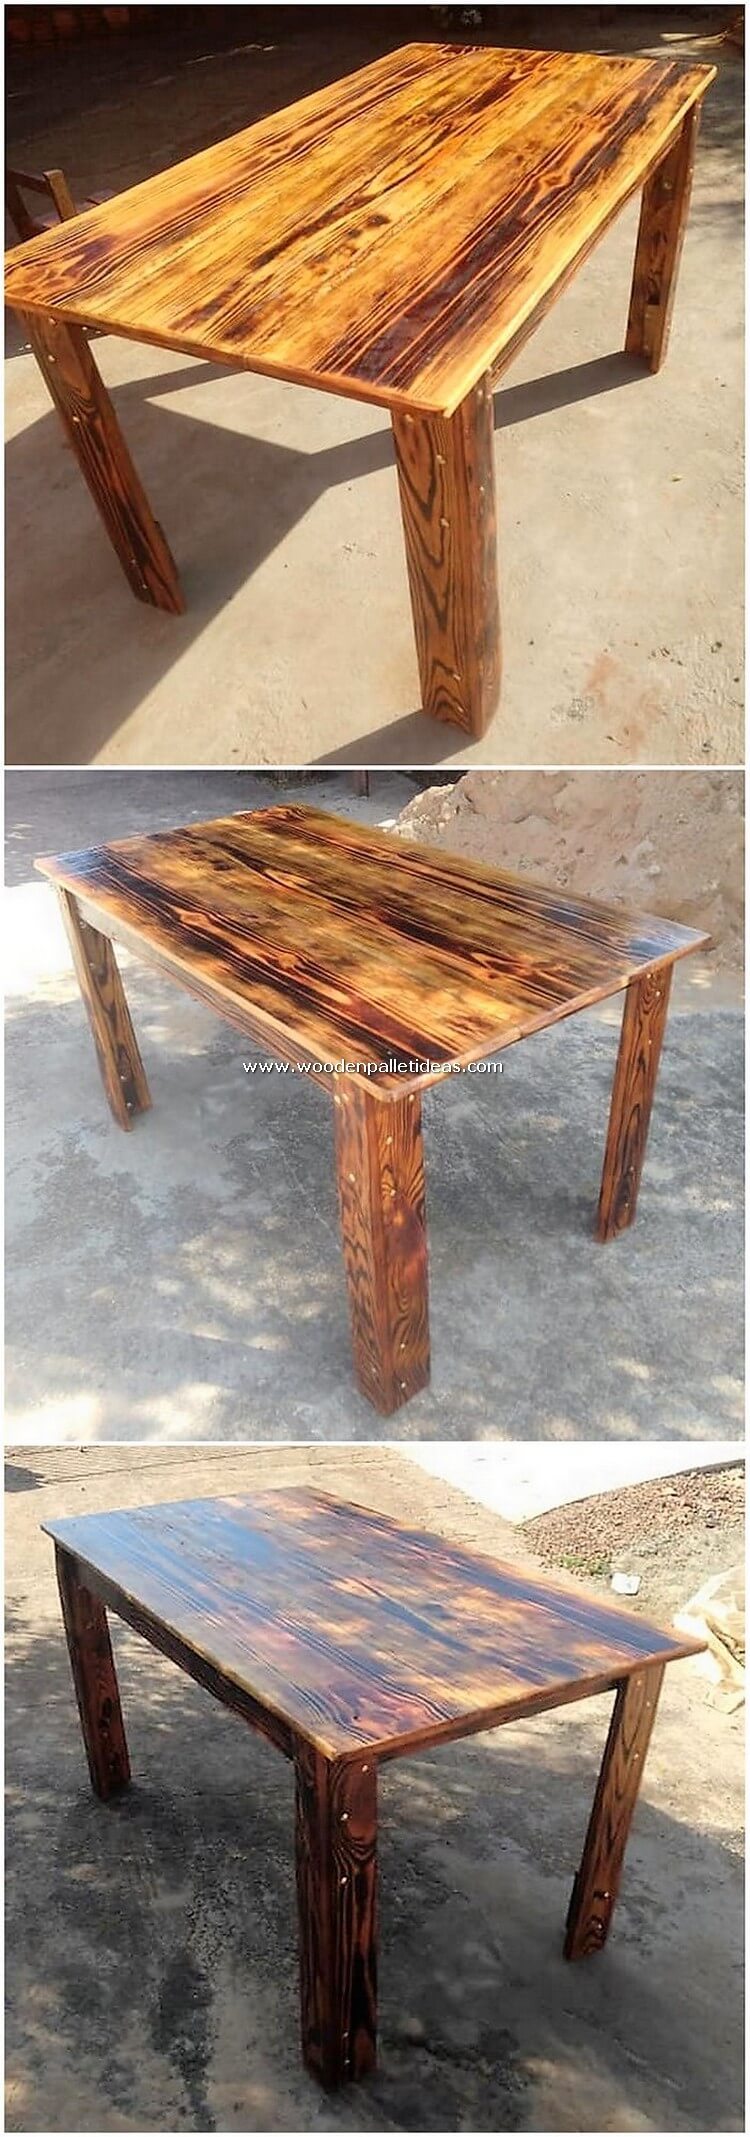 Pallet-Table-2